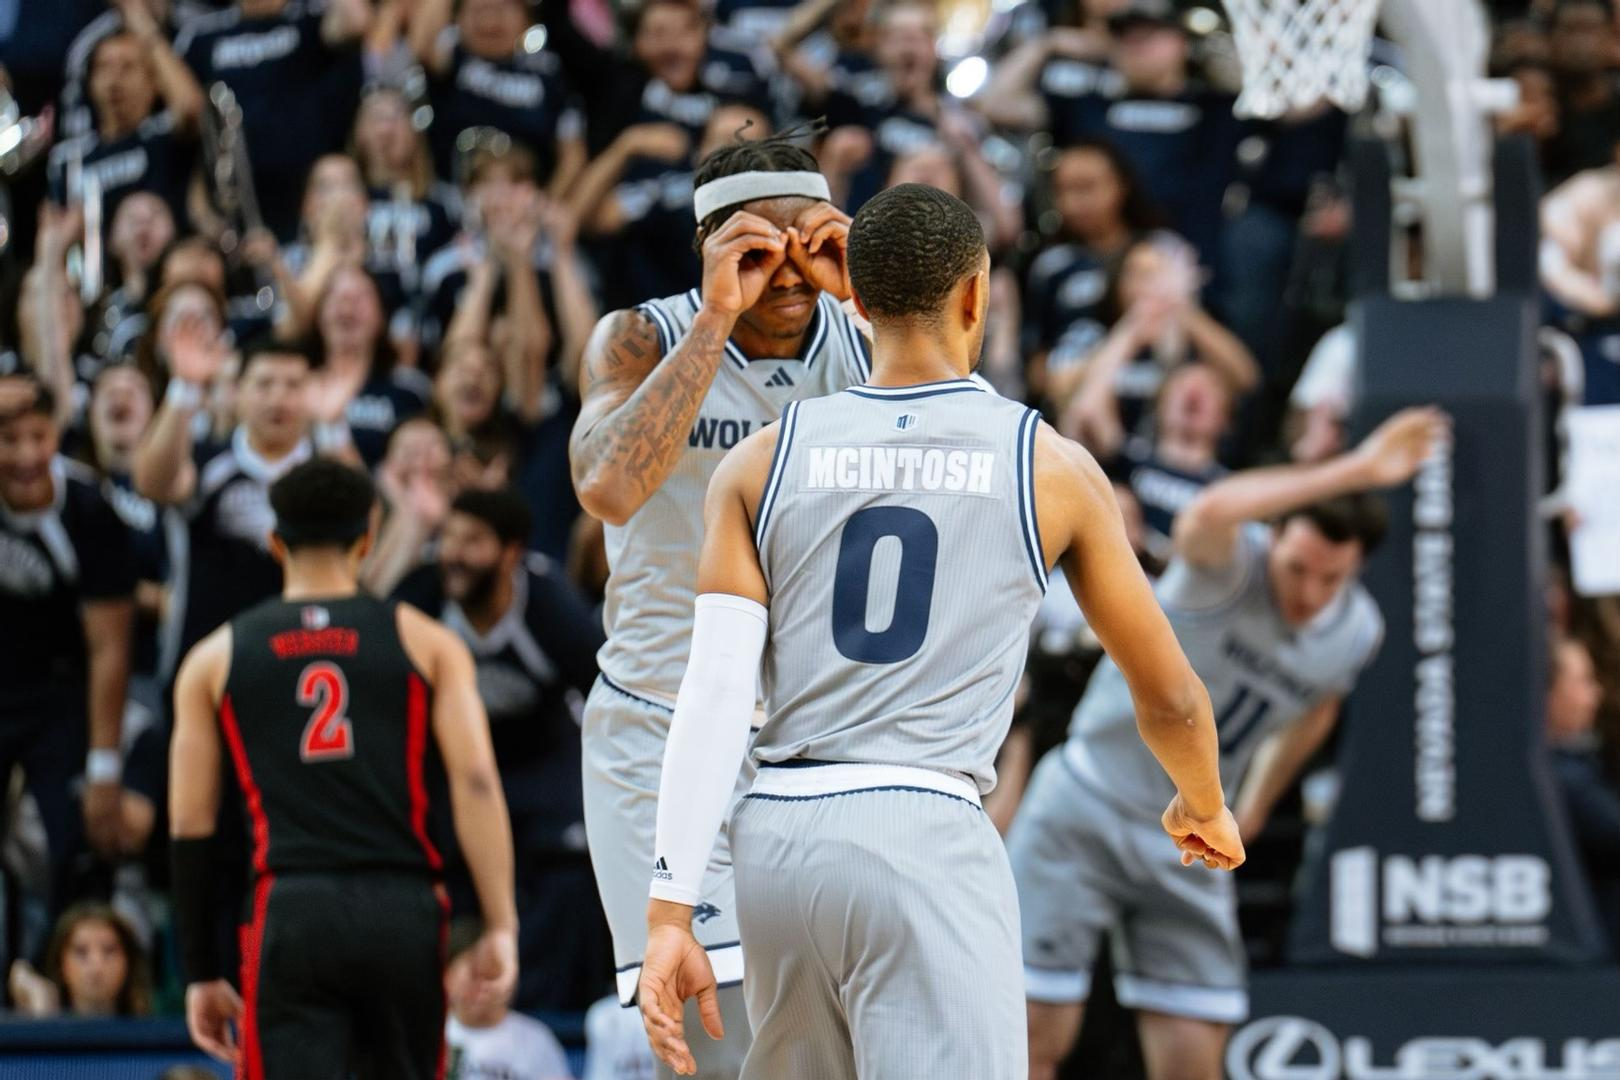 Nevada Returns to the AP Poll for First Time Since 2019